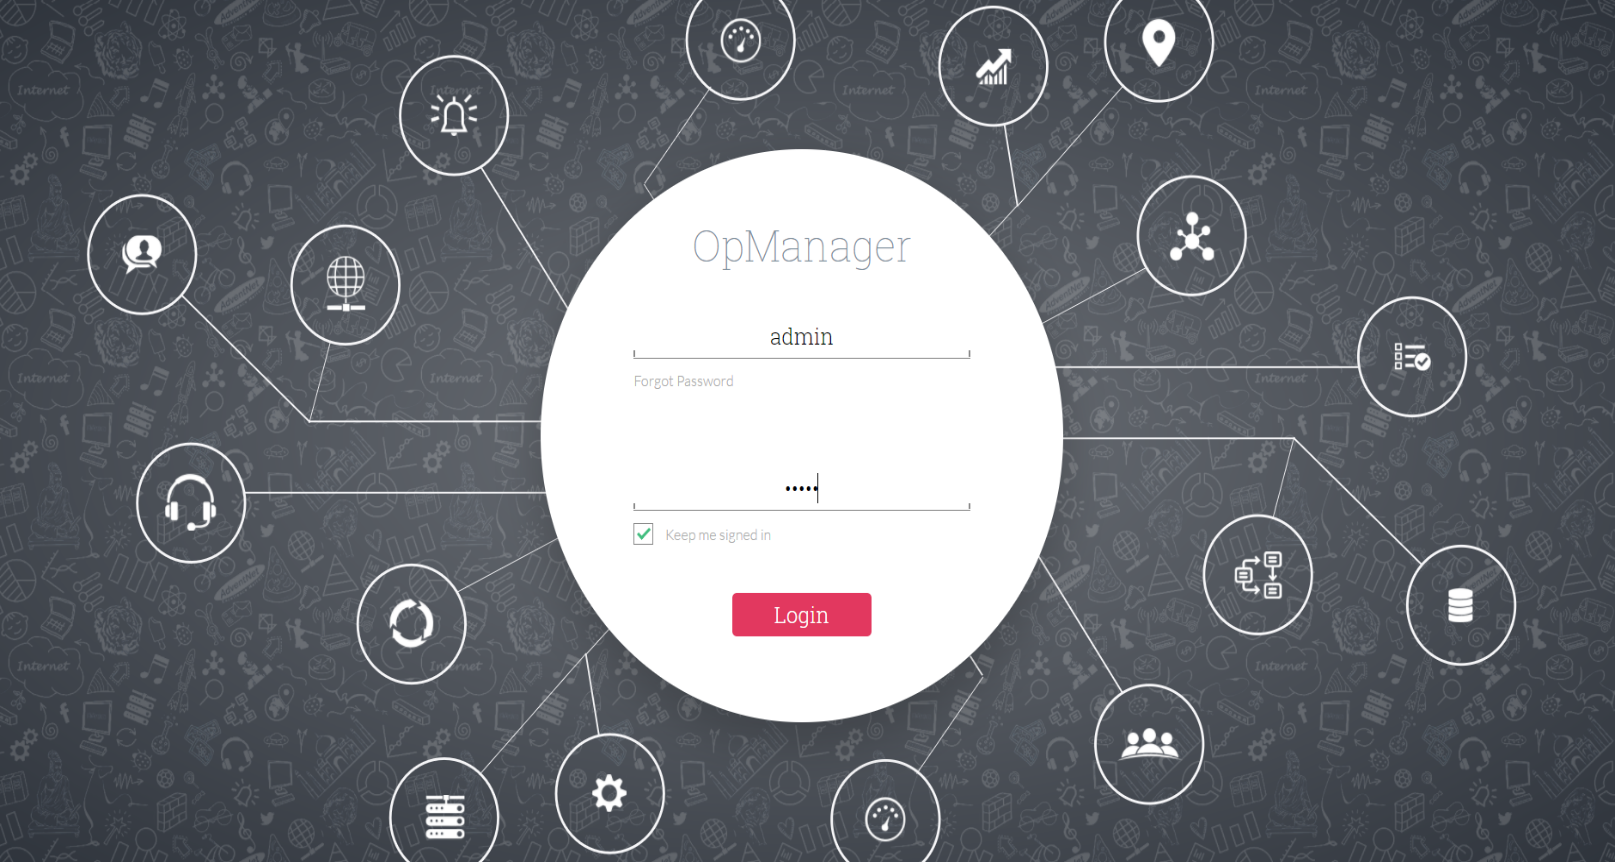 with OpManager v12.2